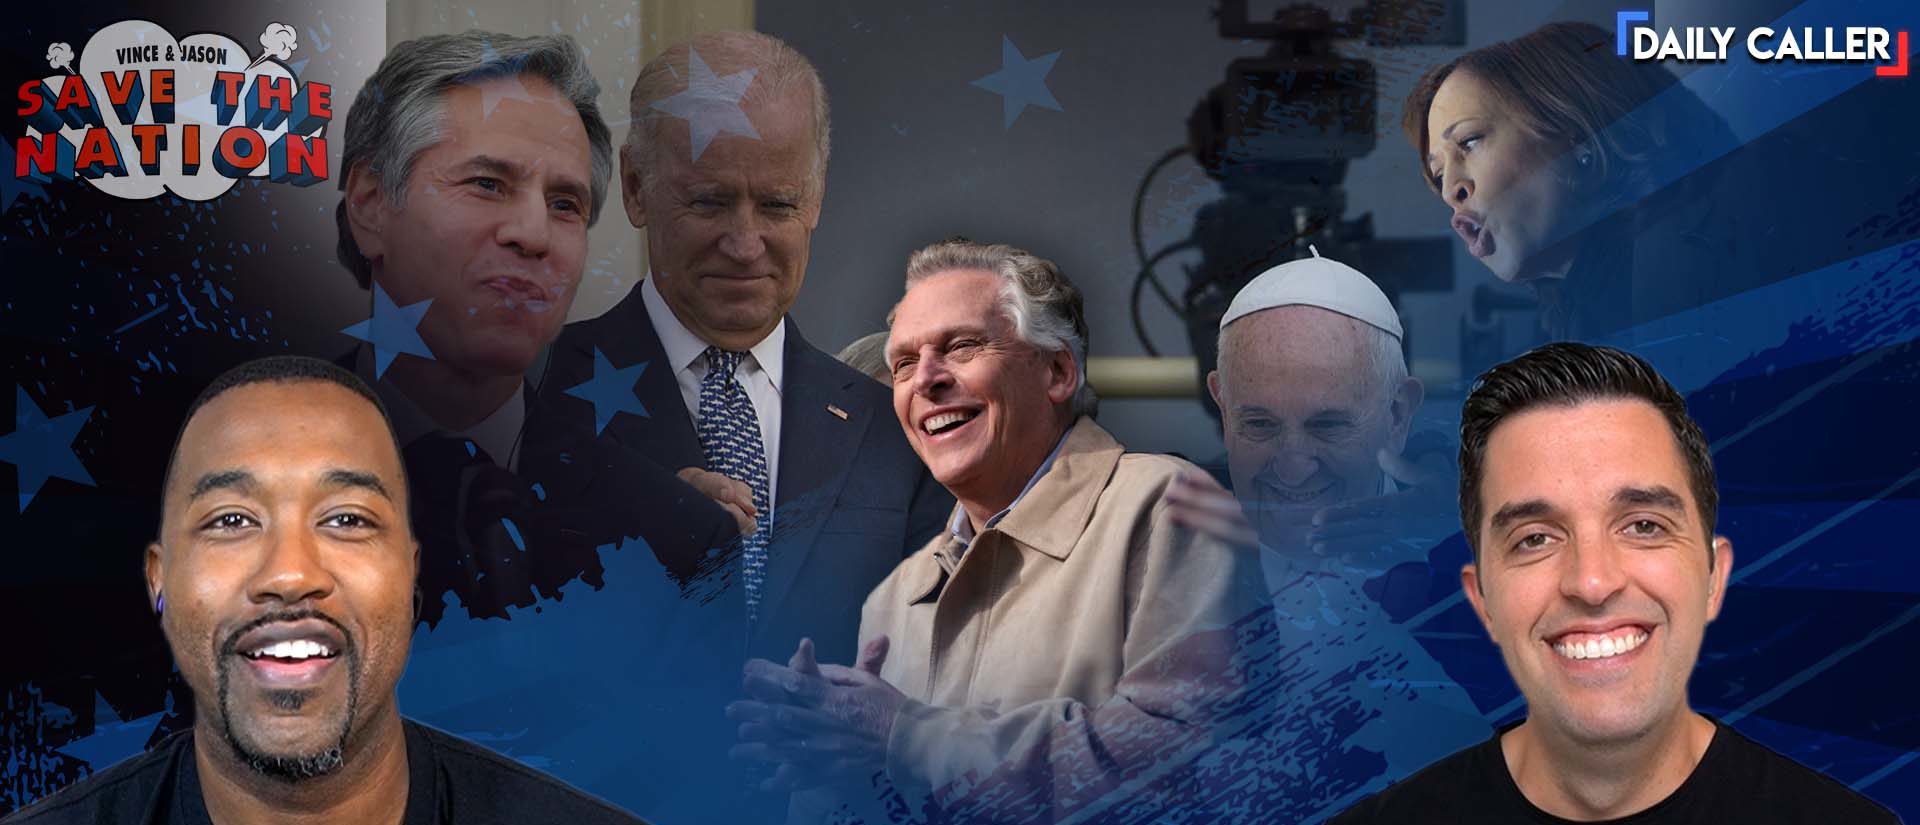 Biden’s Terrible Poll Numbers, Terry McAuliffe Stumbles In VA Election | Vince & Jason Save The Nation